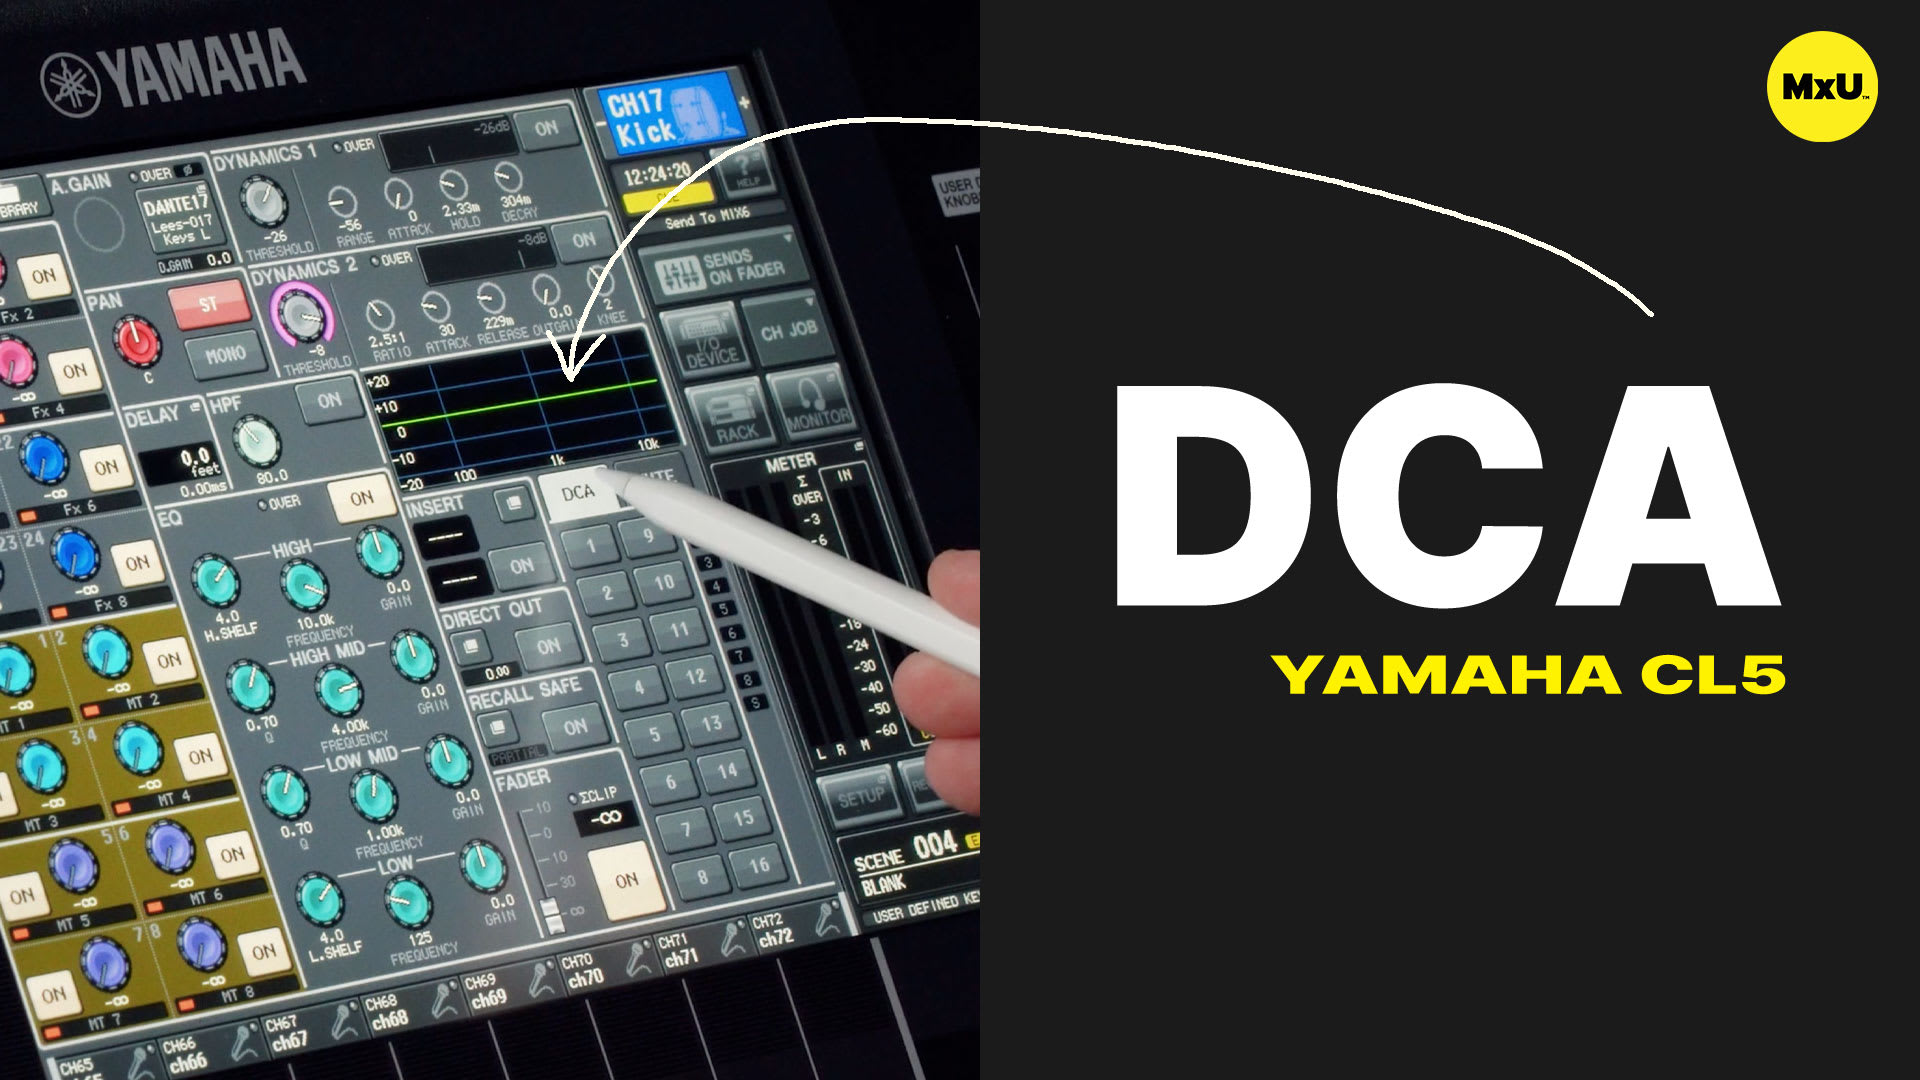 DCA's on the Yamaha CL5 Console